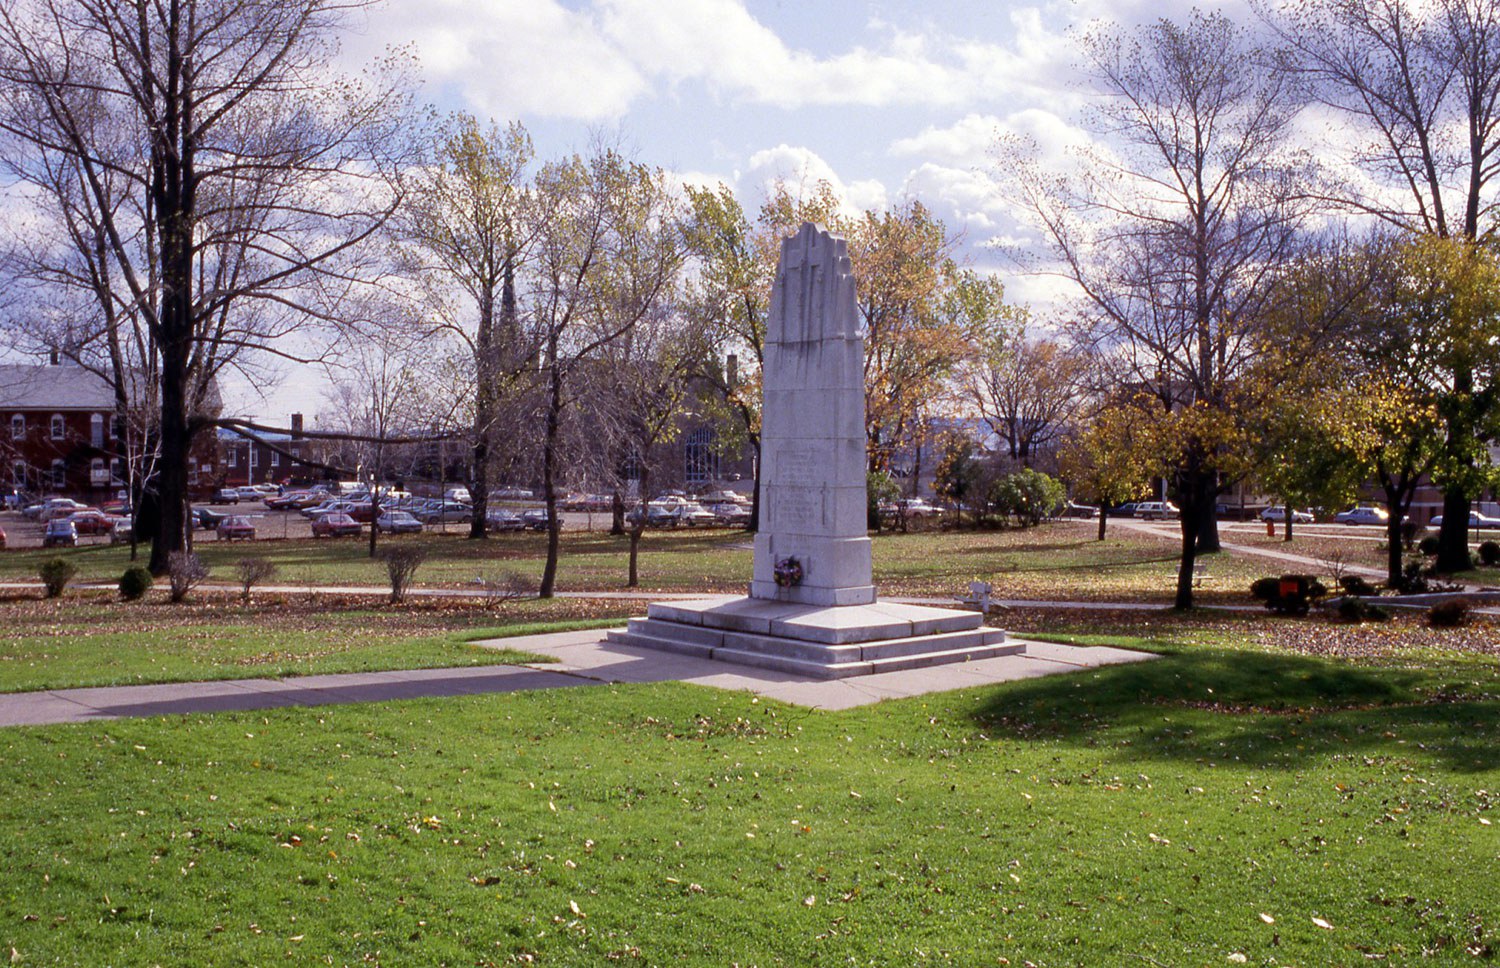 The cenotaph in Thunder Bay’s Waverley Park, part of the Waverley Park HCD, and Ontario’s second-oldest municipal park. Photo courtesy of the City of Thunder Bay, Heritage Advisory Committee.